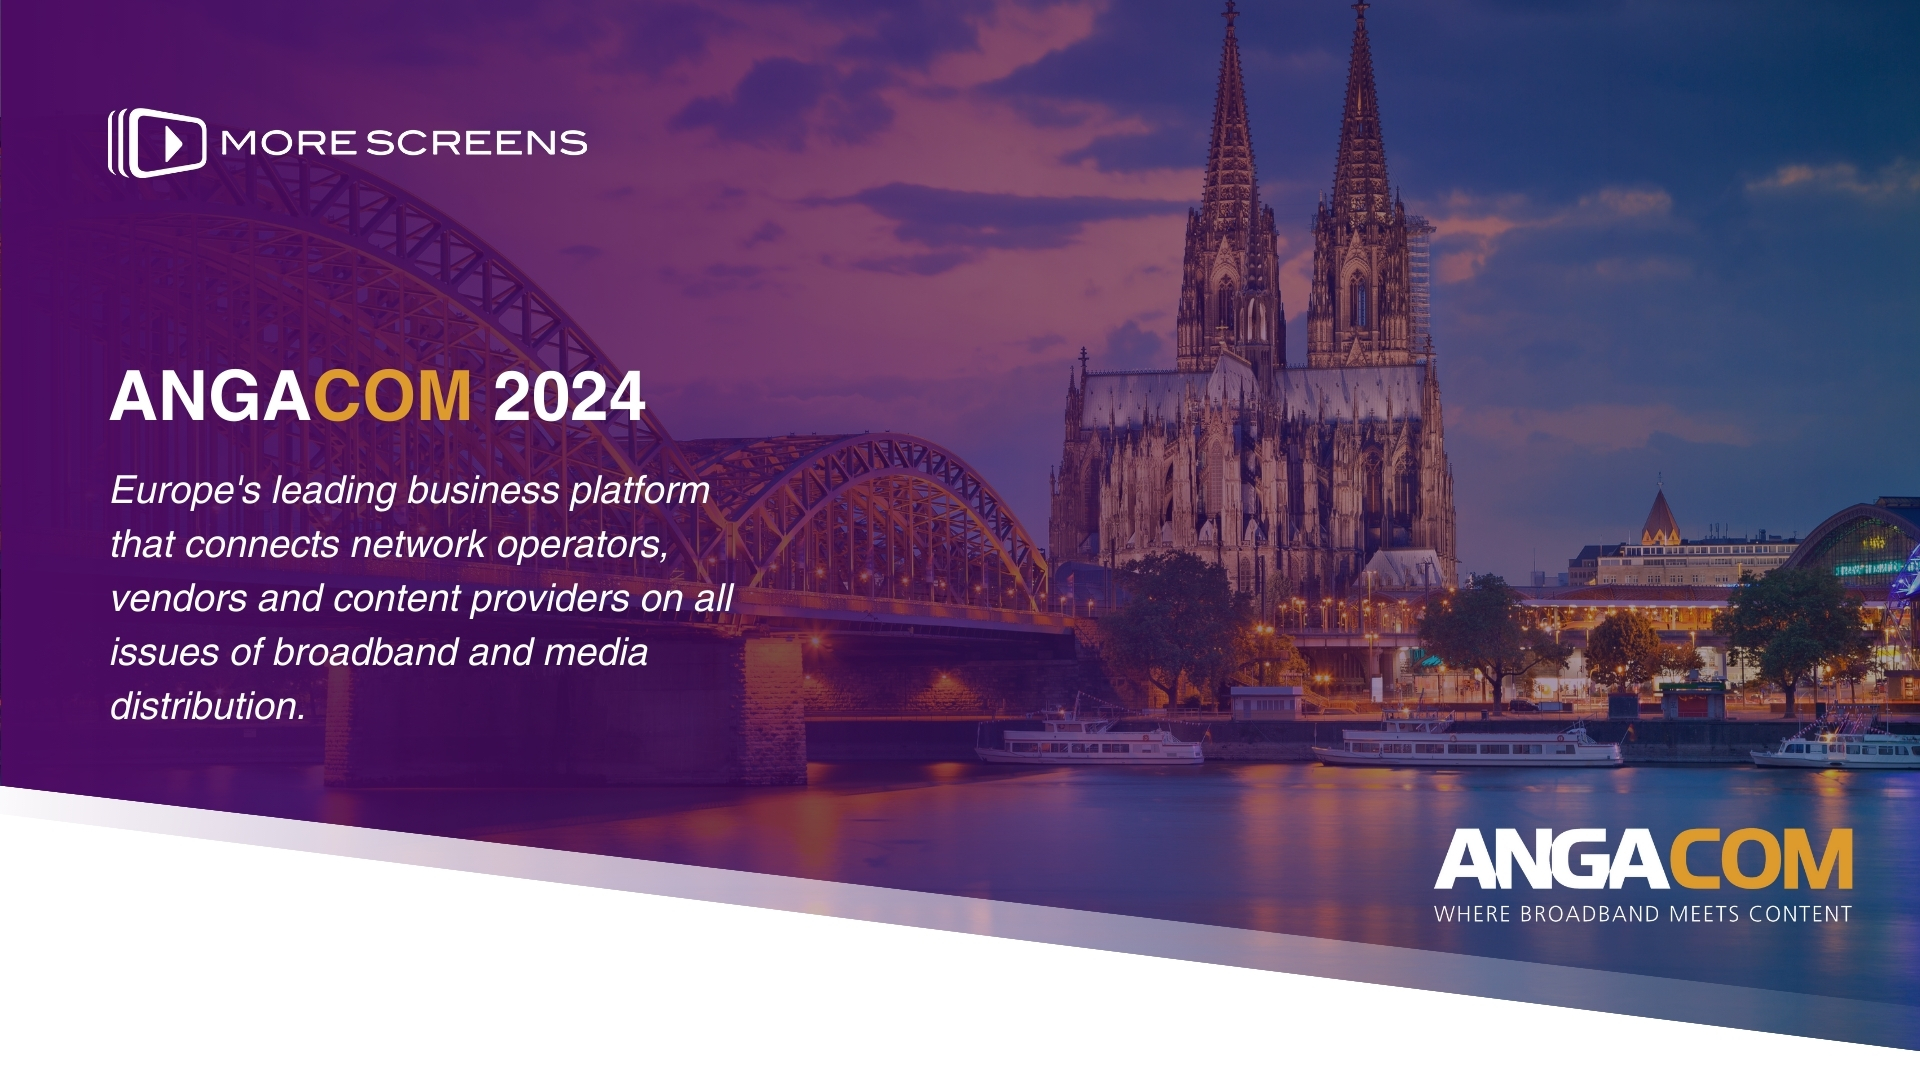 Our team is at ANGA COM 2024 – meet us there!